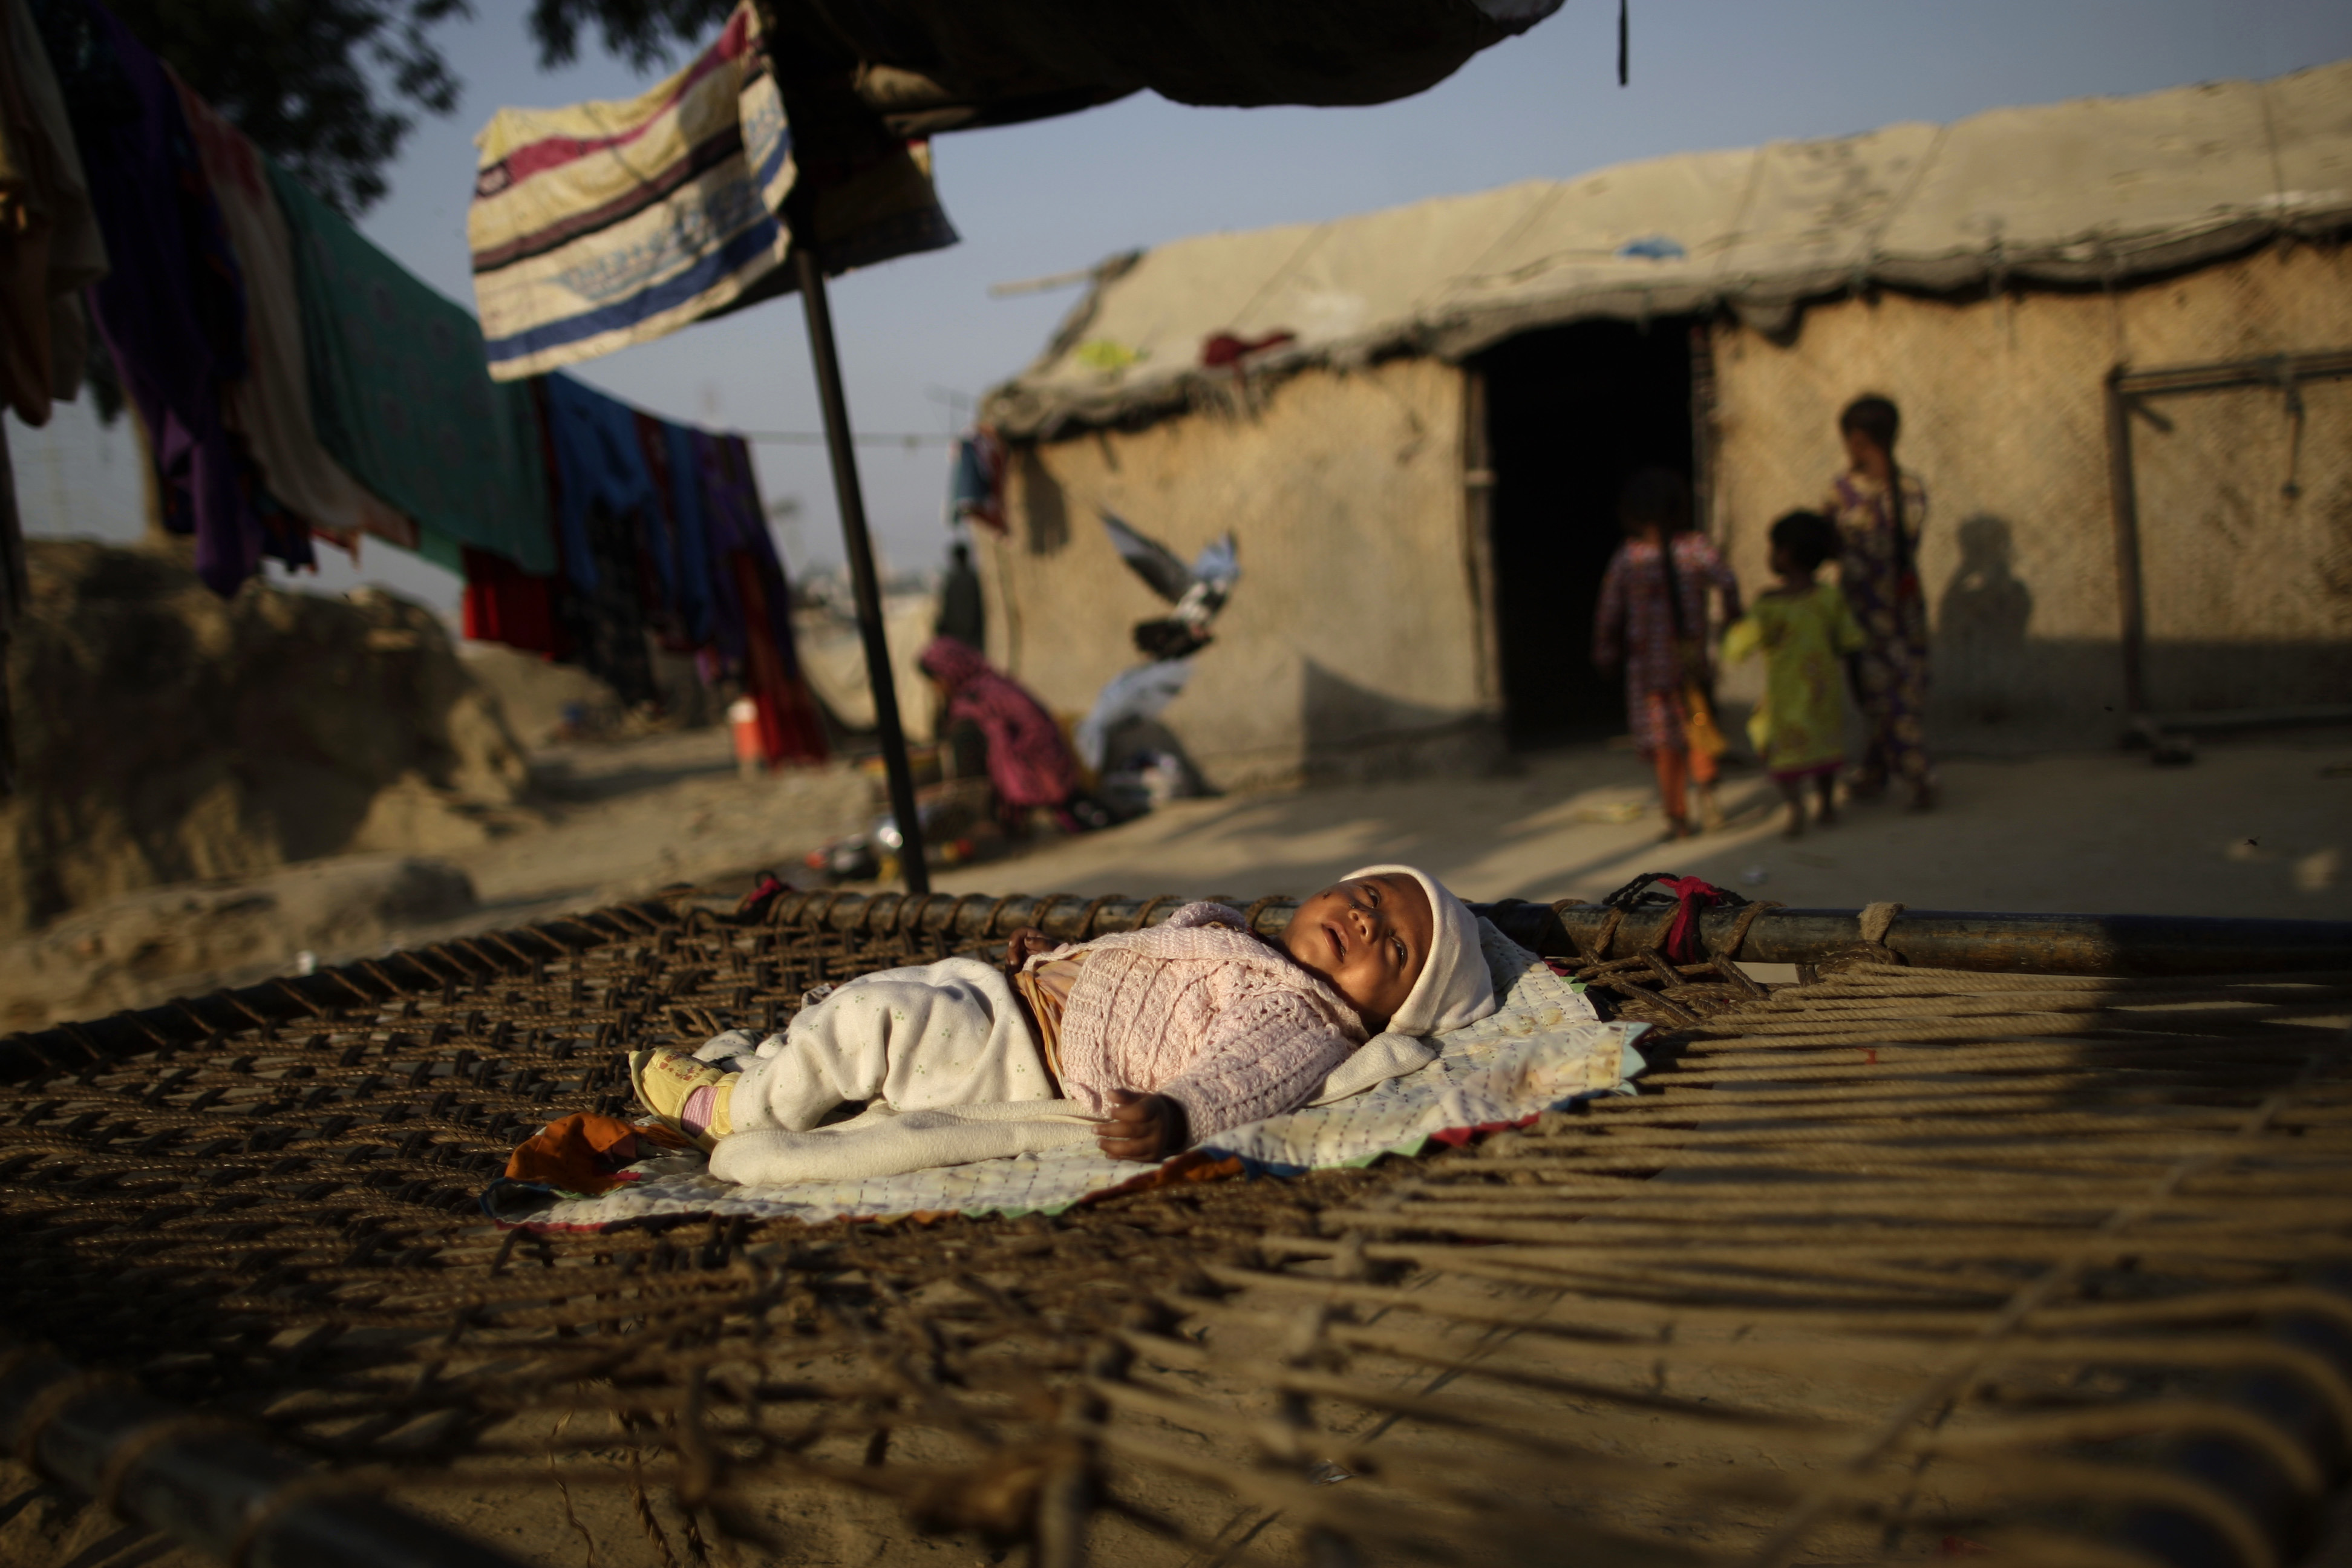 Oct. 8, 2012. A Pakistani child who was displaced from a village in Pakistan's Sindh province by floods in 2010, lies on a bed inside his family's makeshift home, while his mother cleans dishes in a slum on the outskirts of Islamabad.